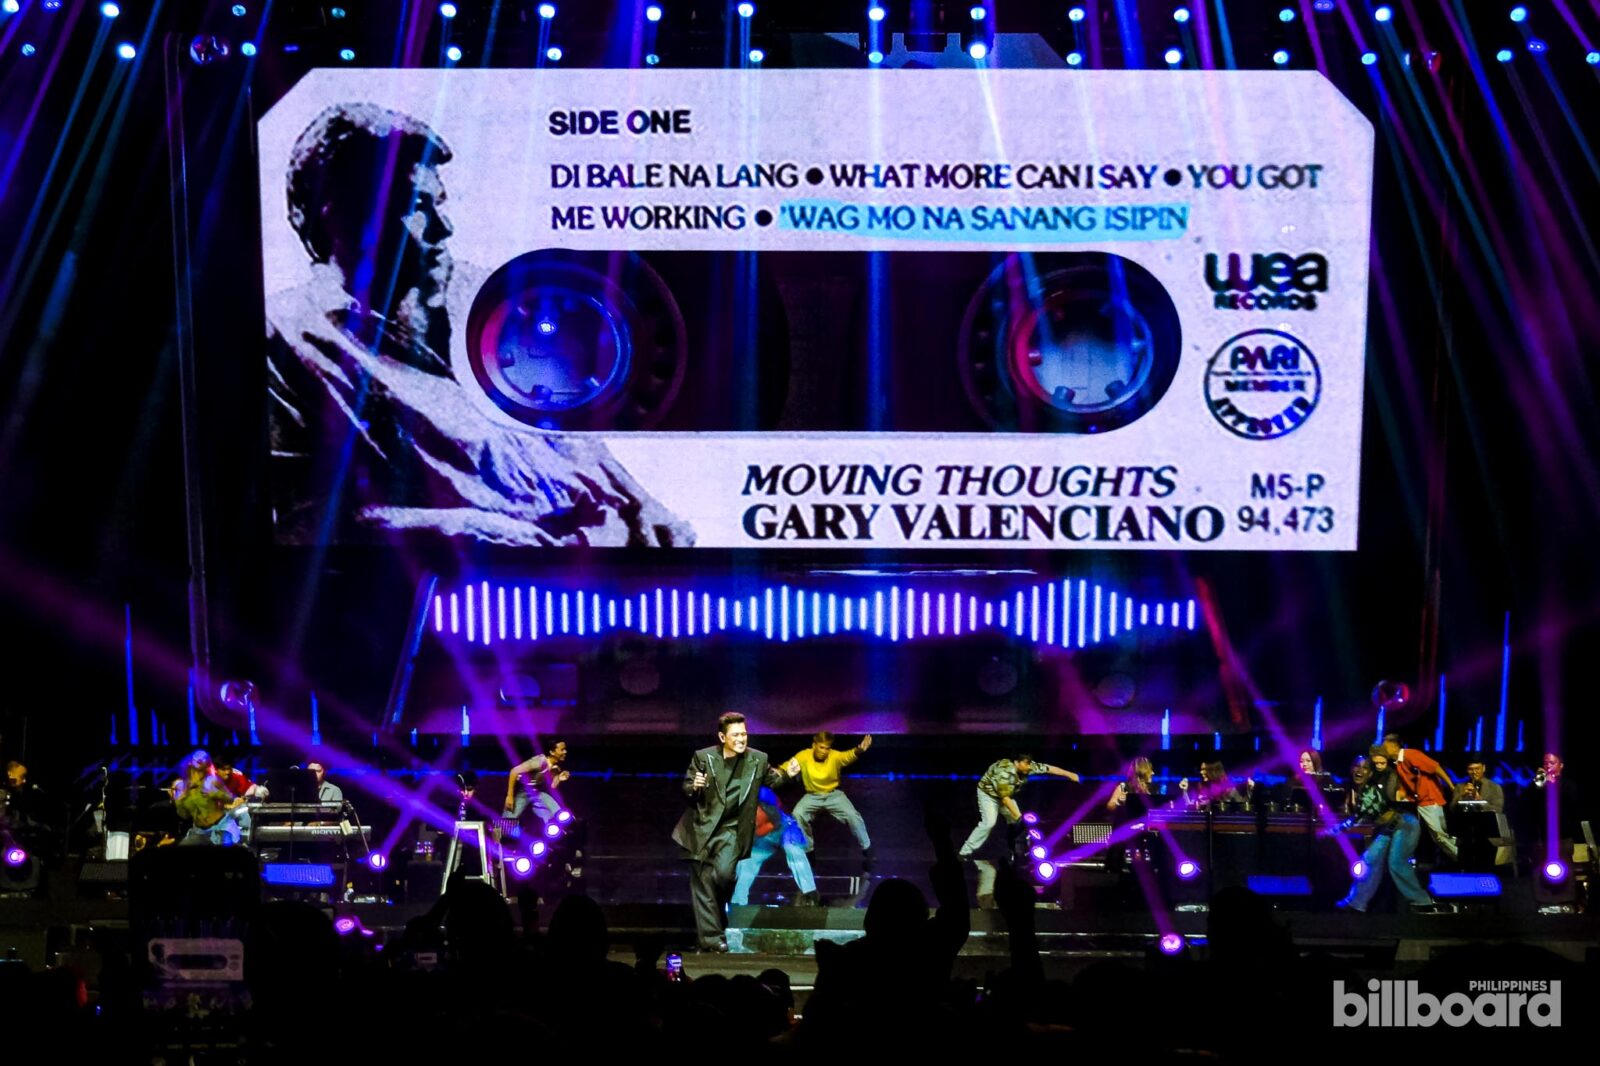 gary valenciano pure energy: one last time